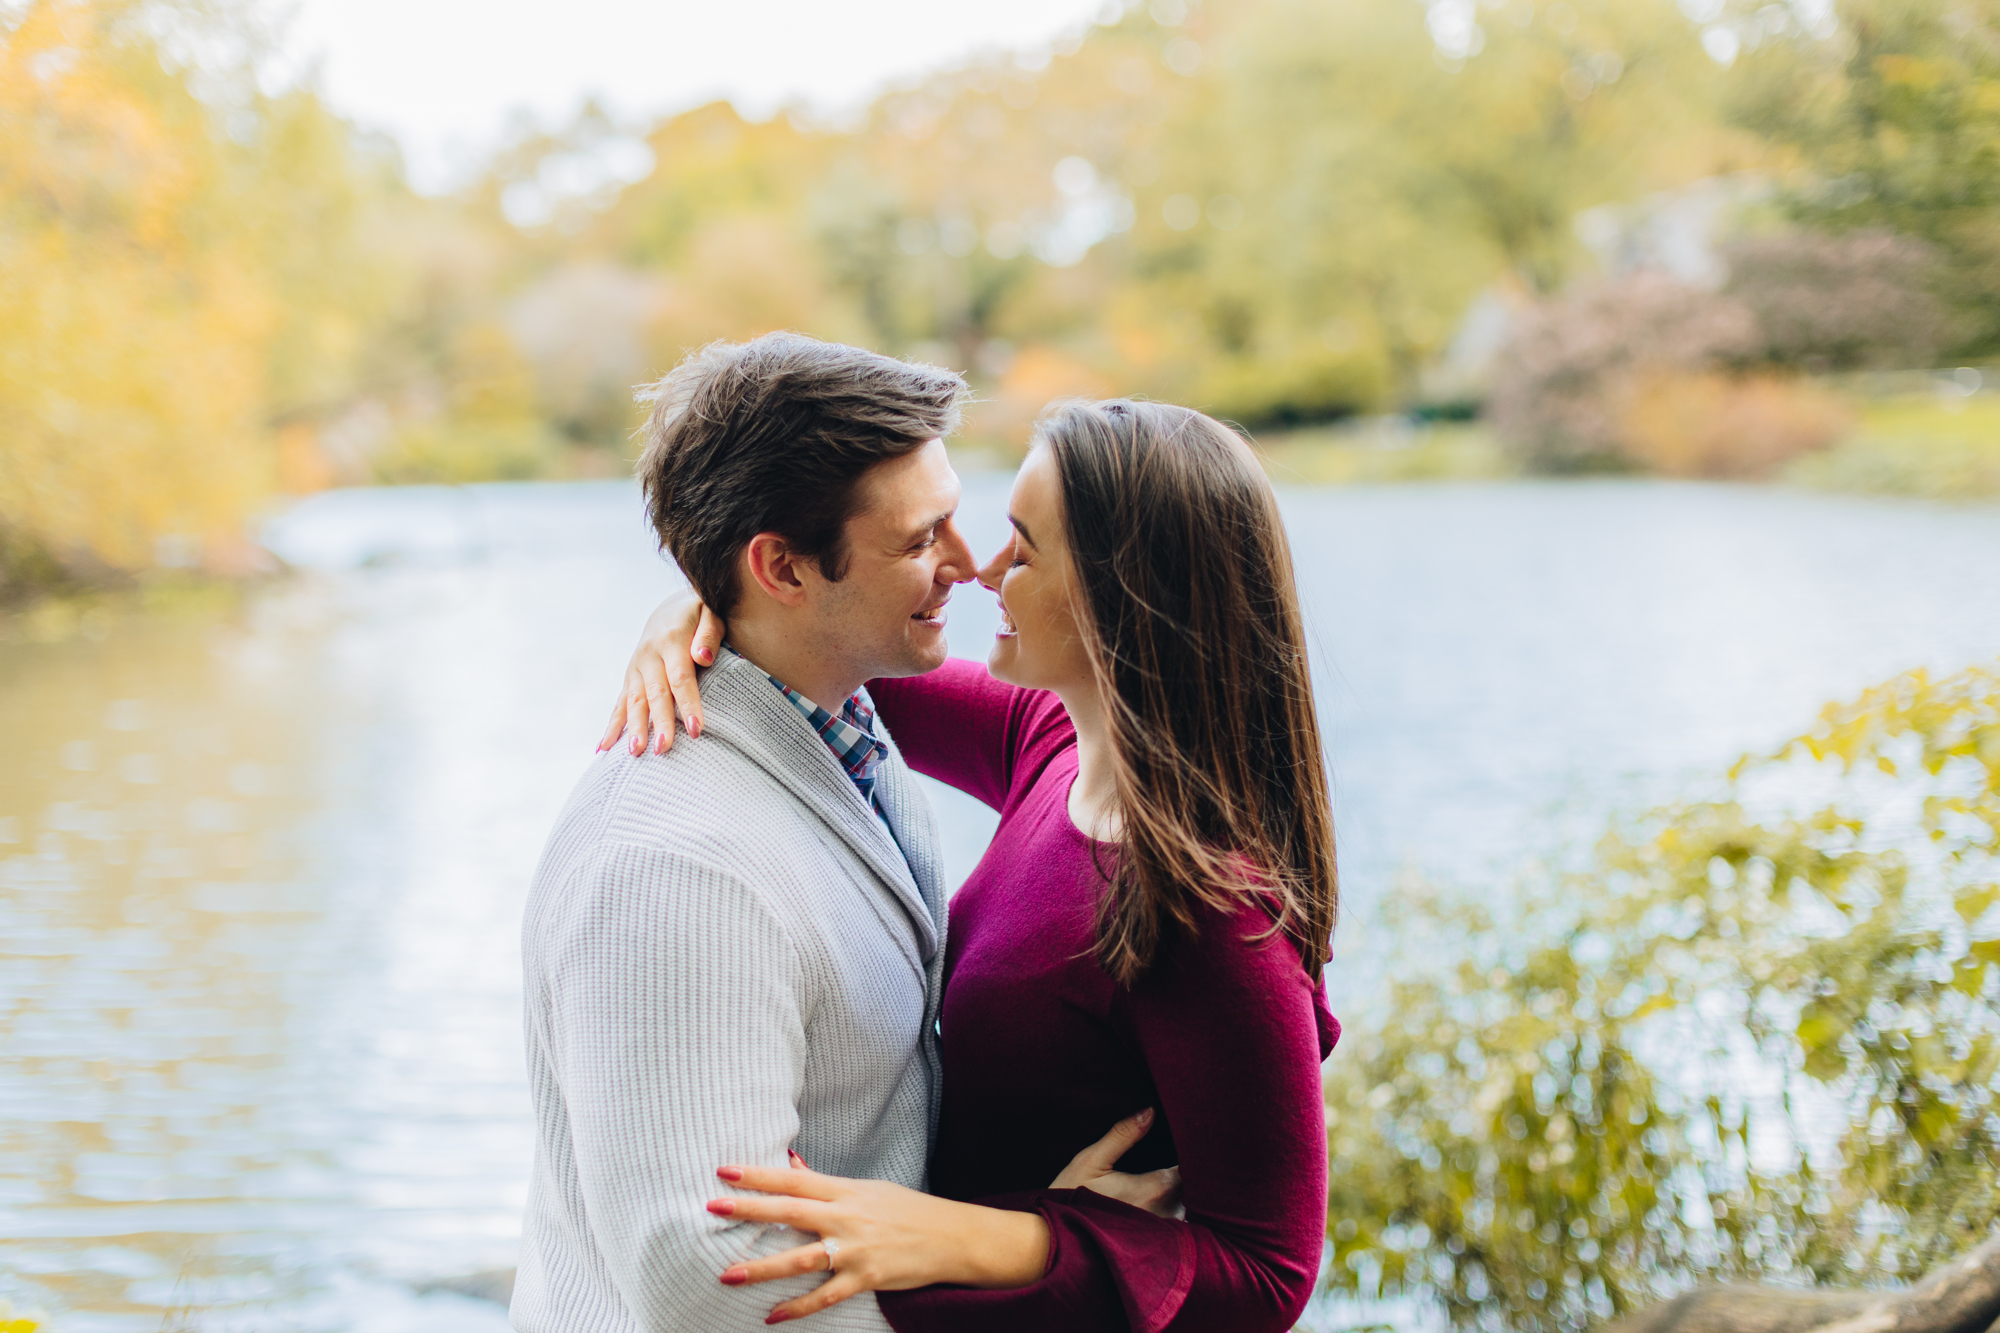 Magical Fall Engagement Photos in Central Park New York